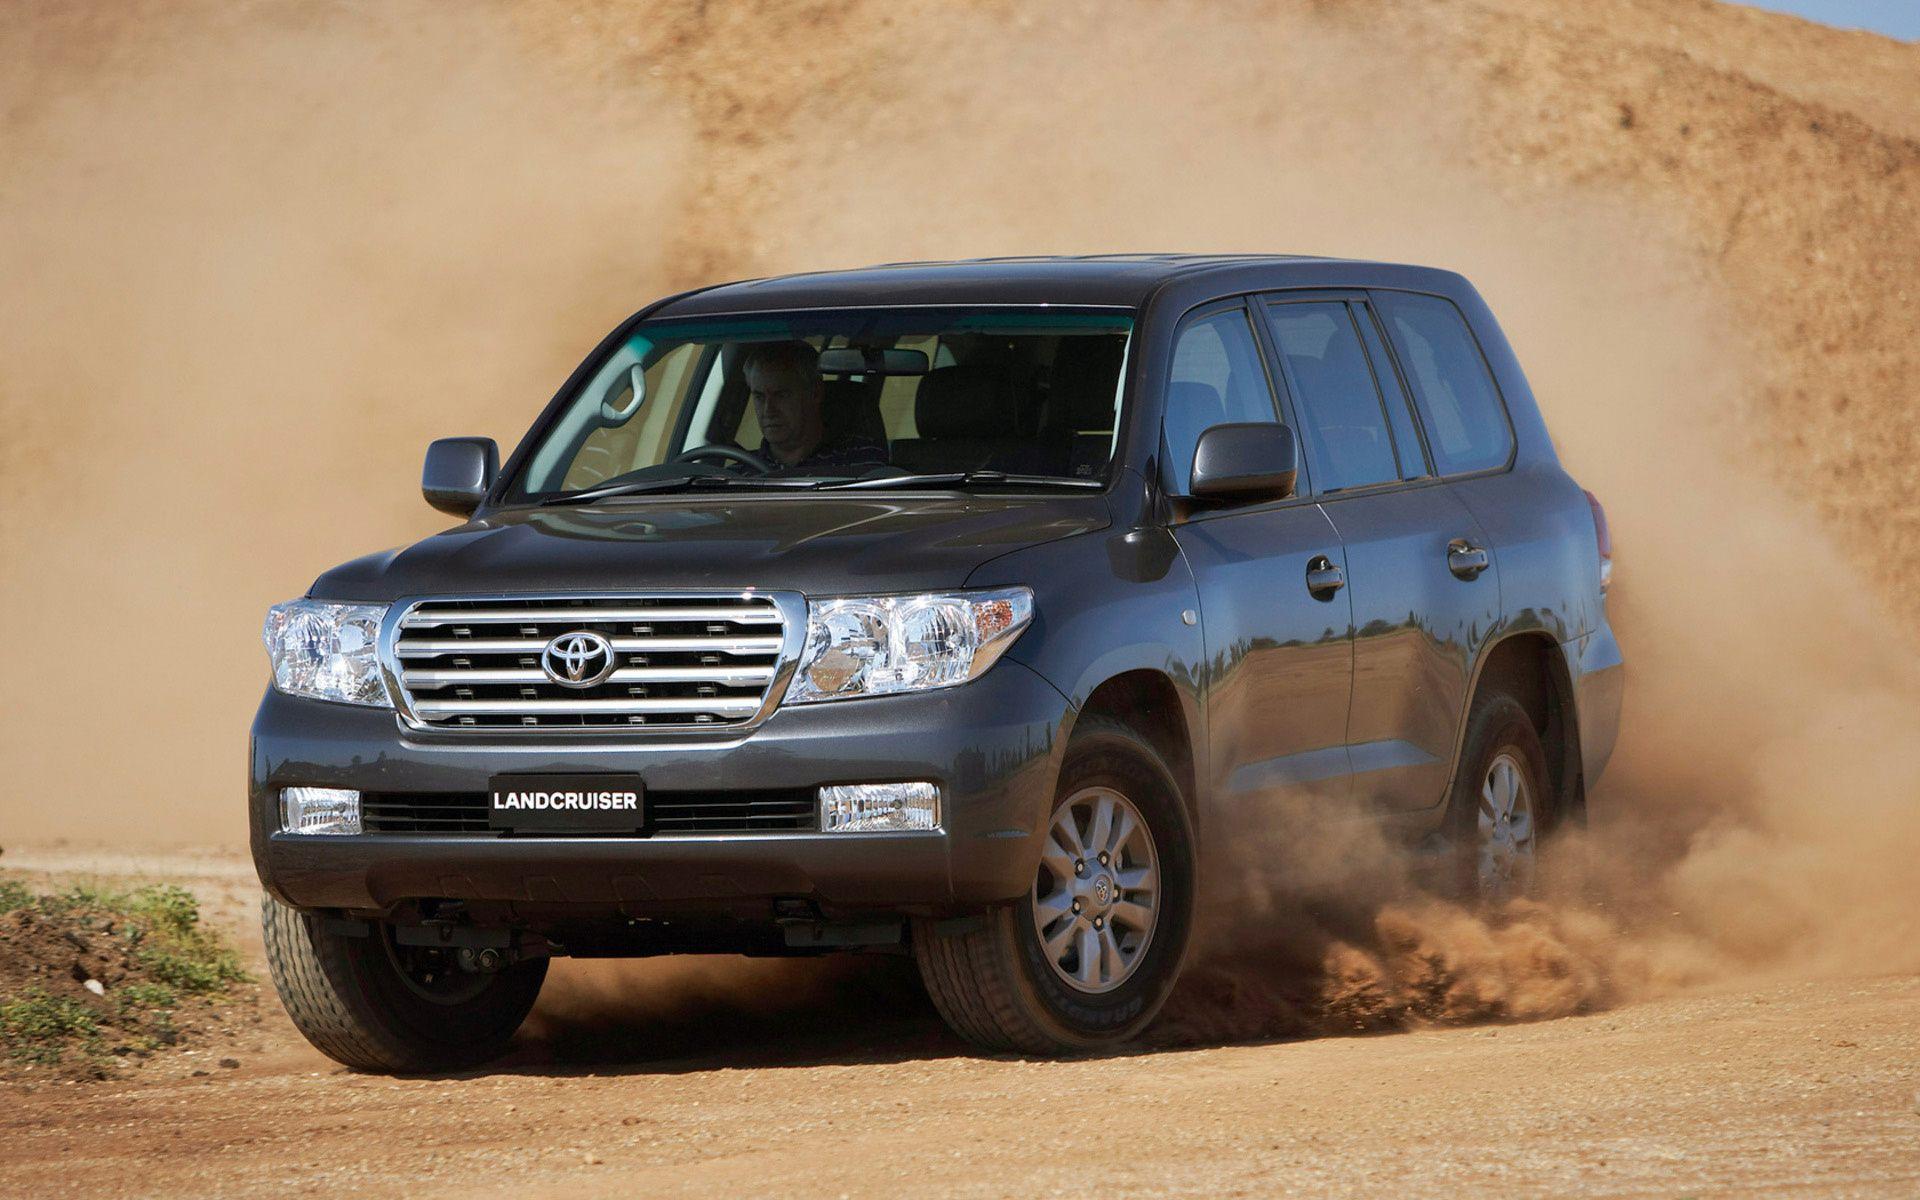 Photo of a car Toyota Land Cruiser 200 wallpapers and image